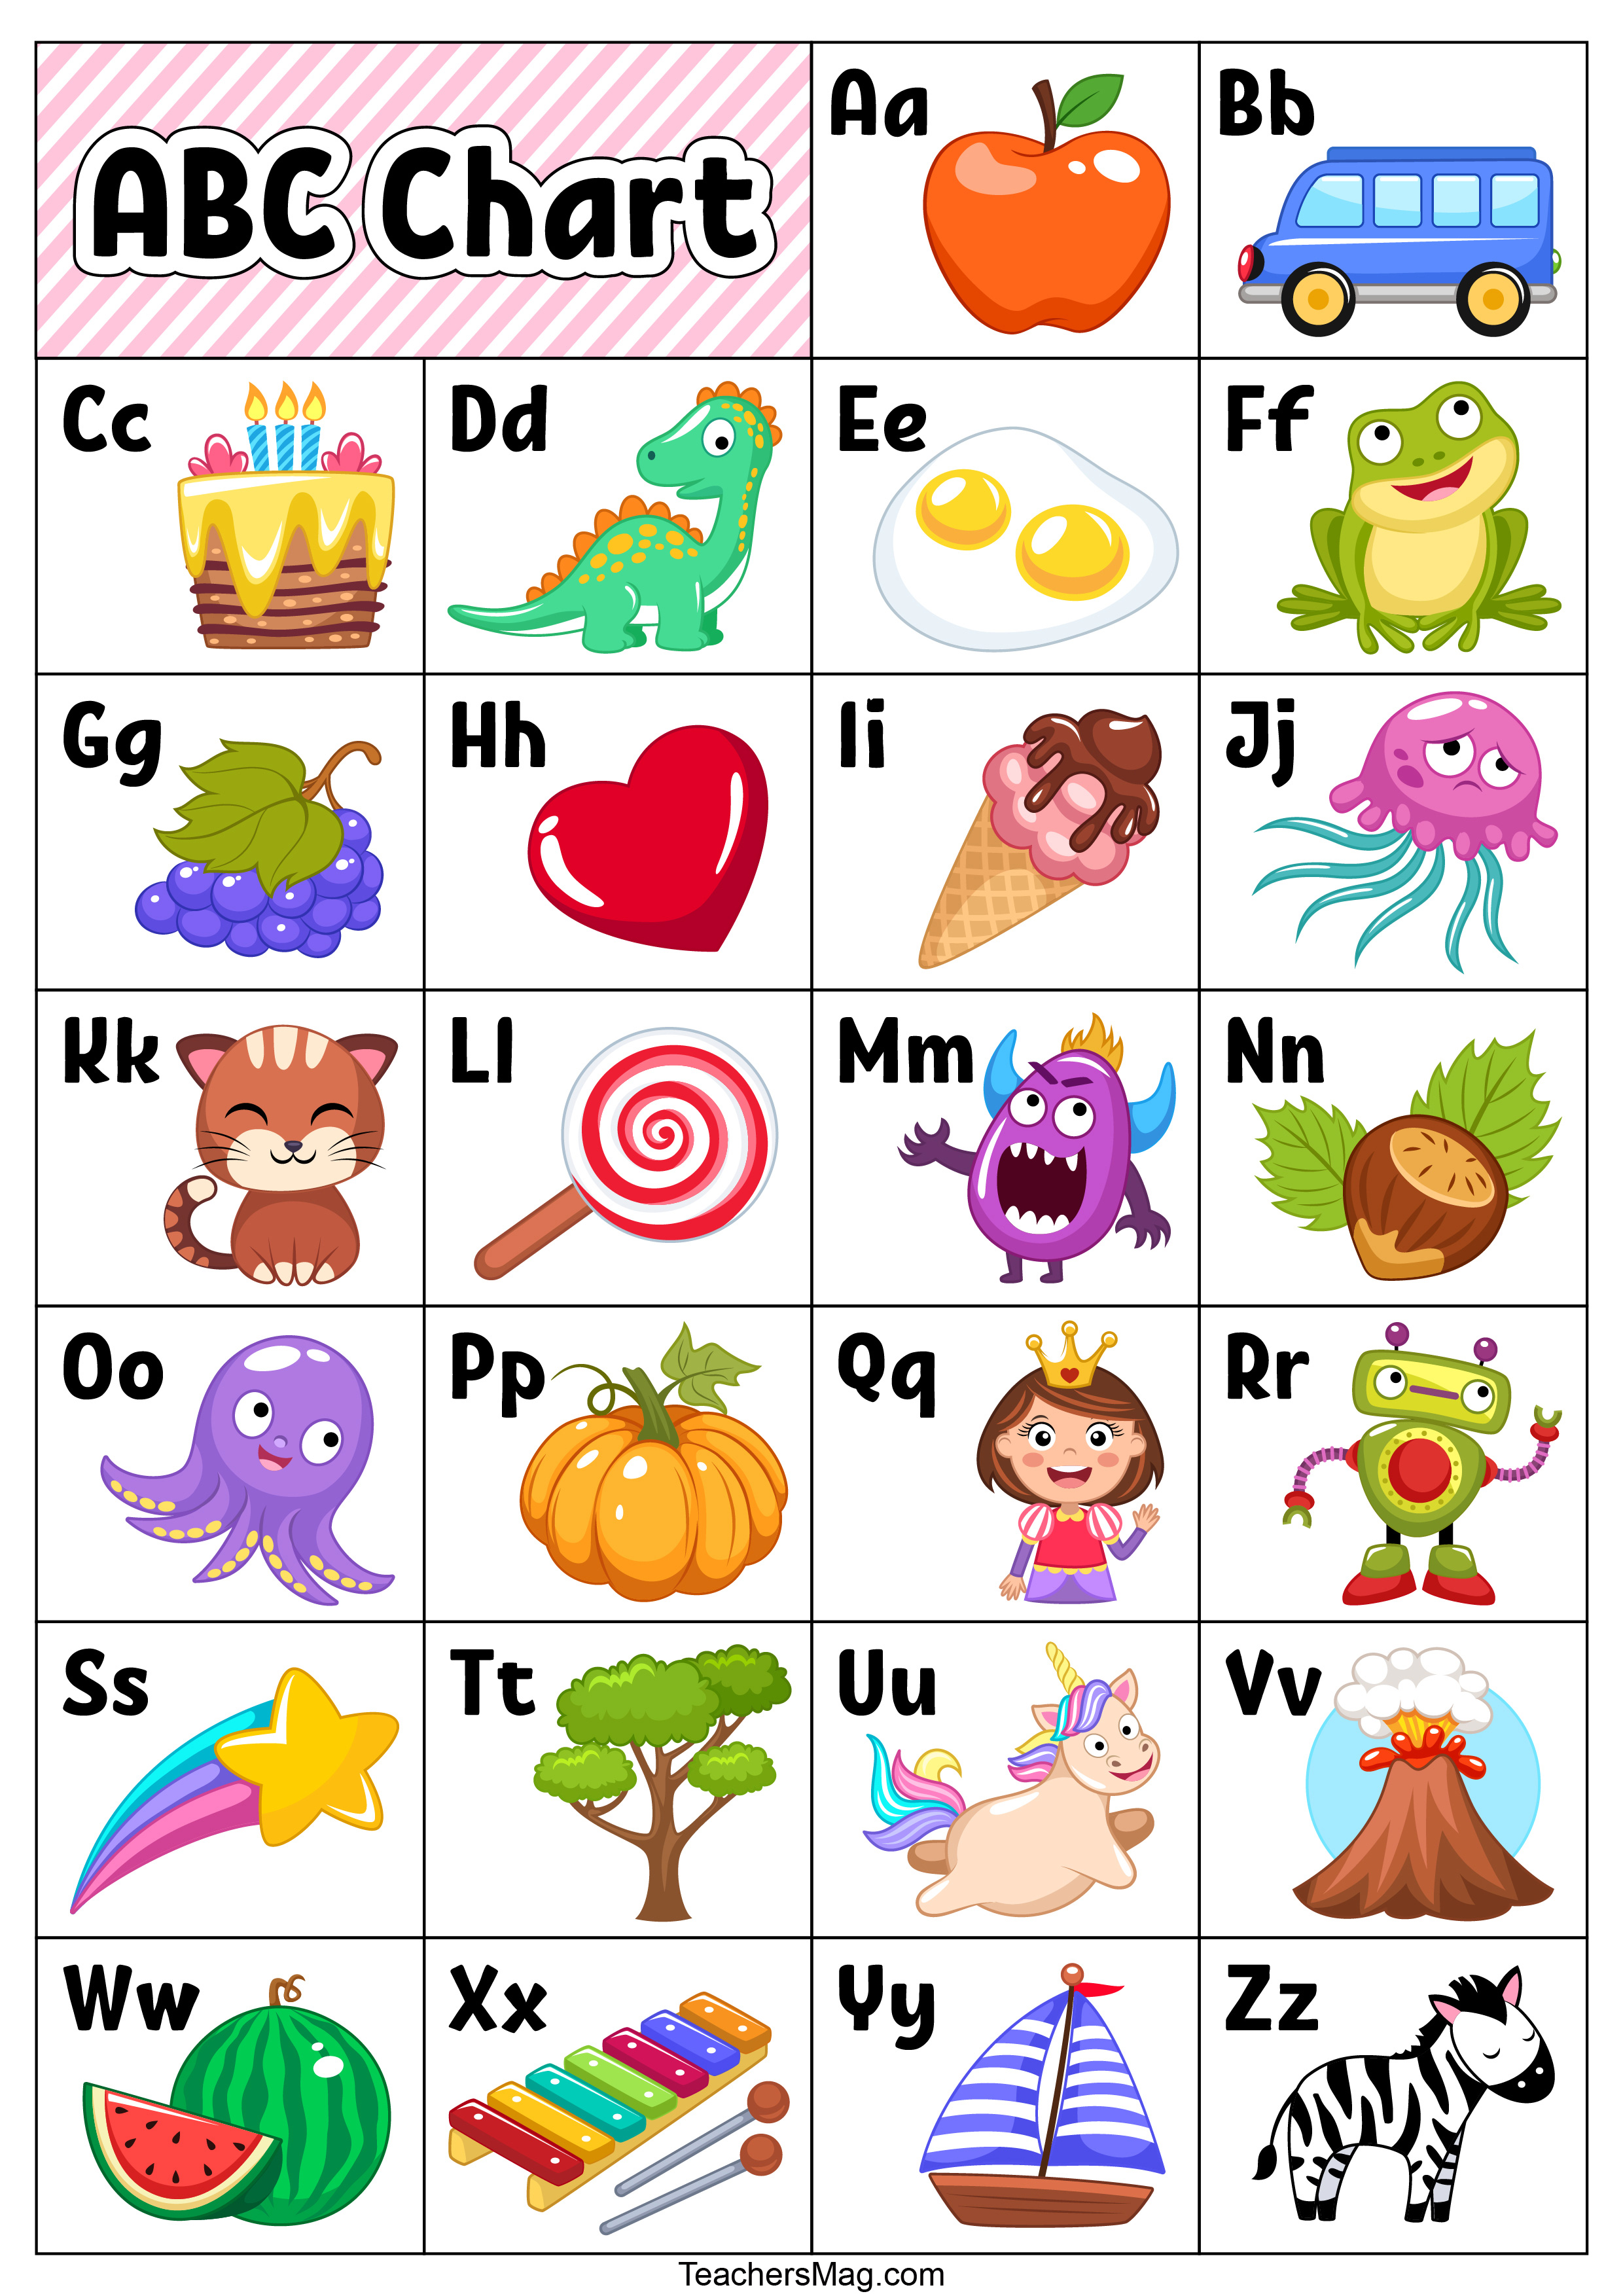 Free Chart and Flash Cards for Learning the Alphabet | TeachersMag.com